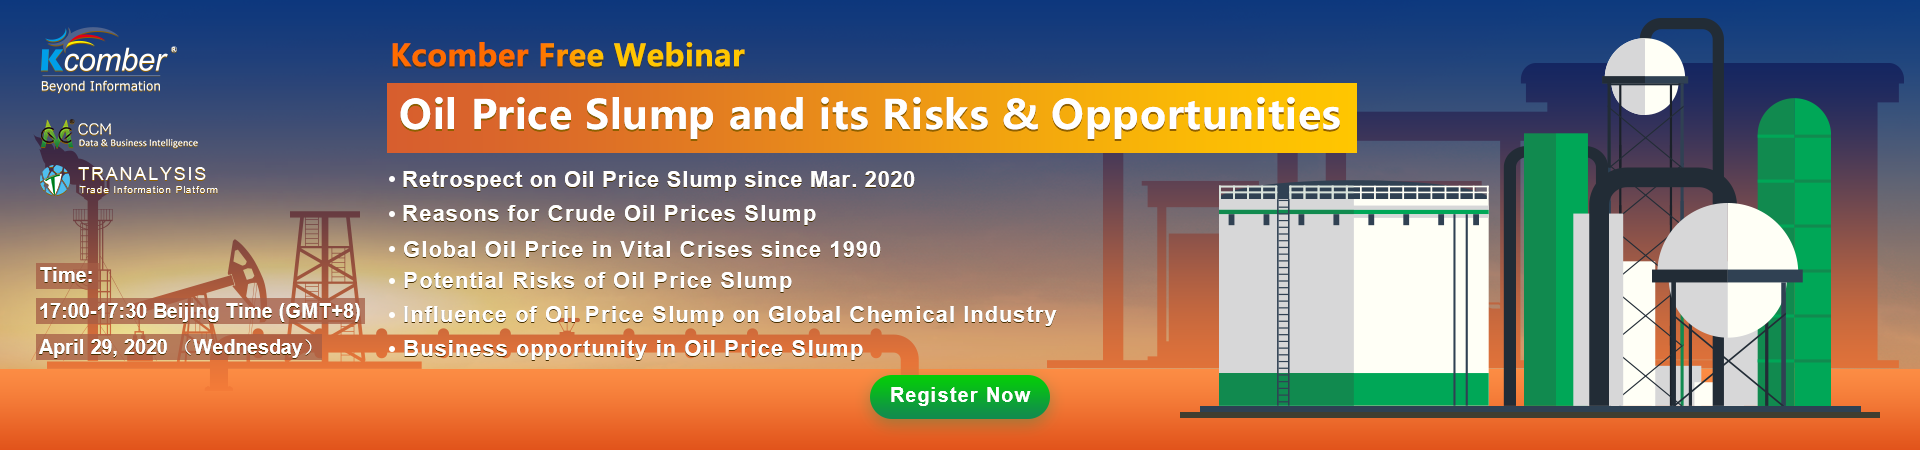 Oil Price Slump and its Risks & Opportunities